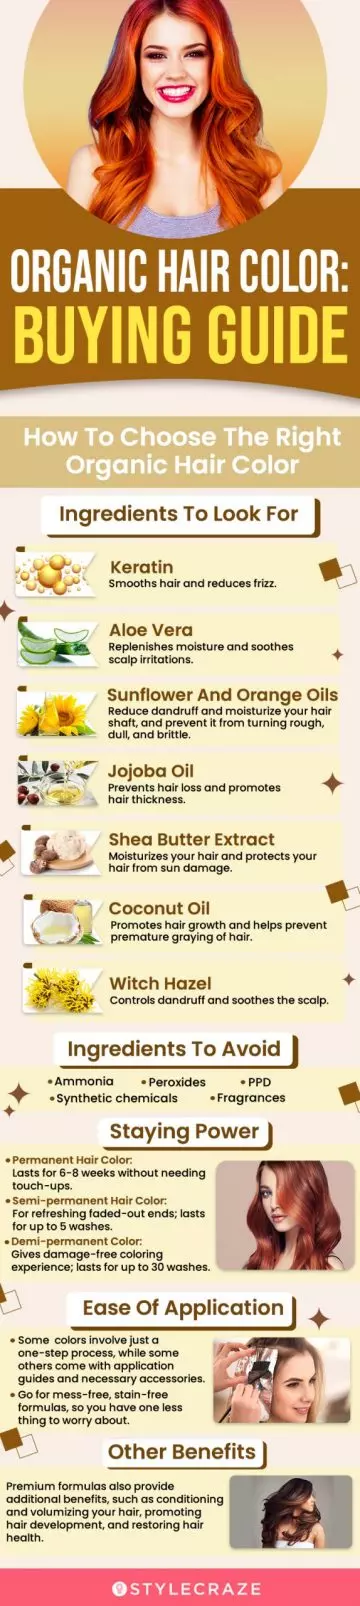 Organic Hair Color: Buying Guide (infographic)